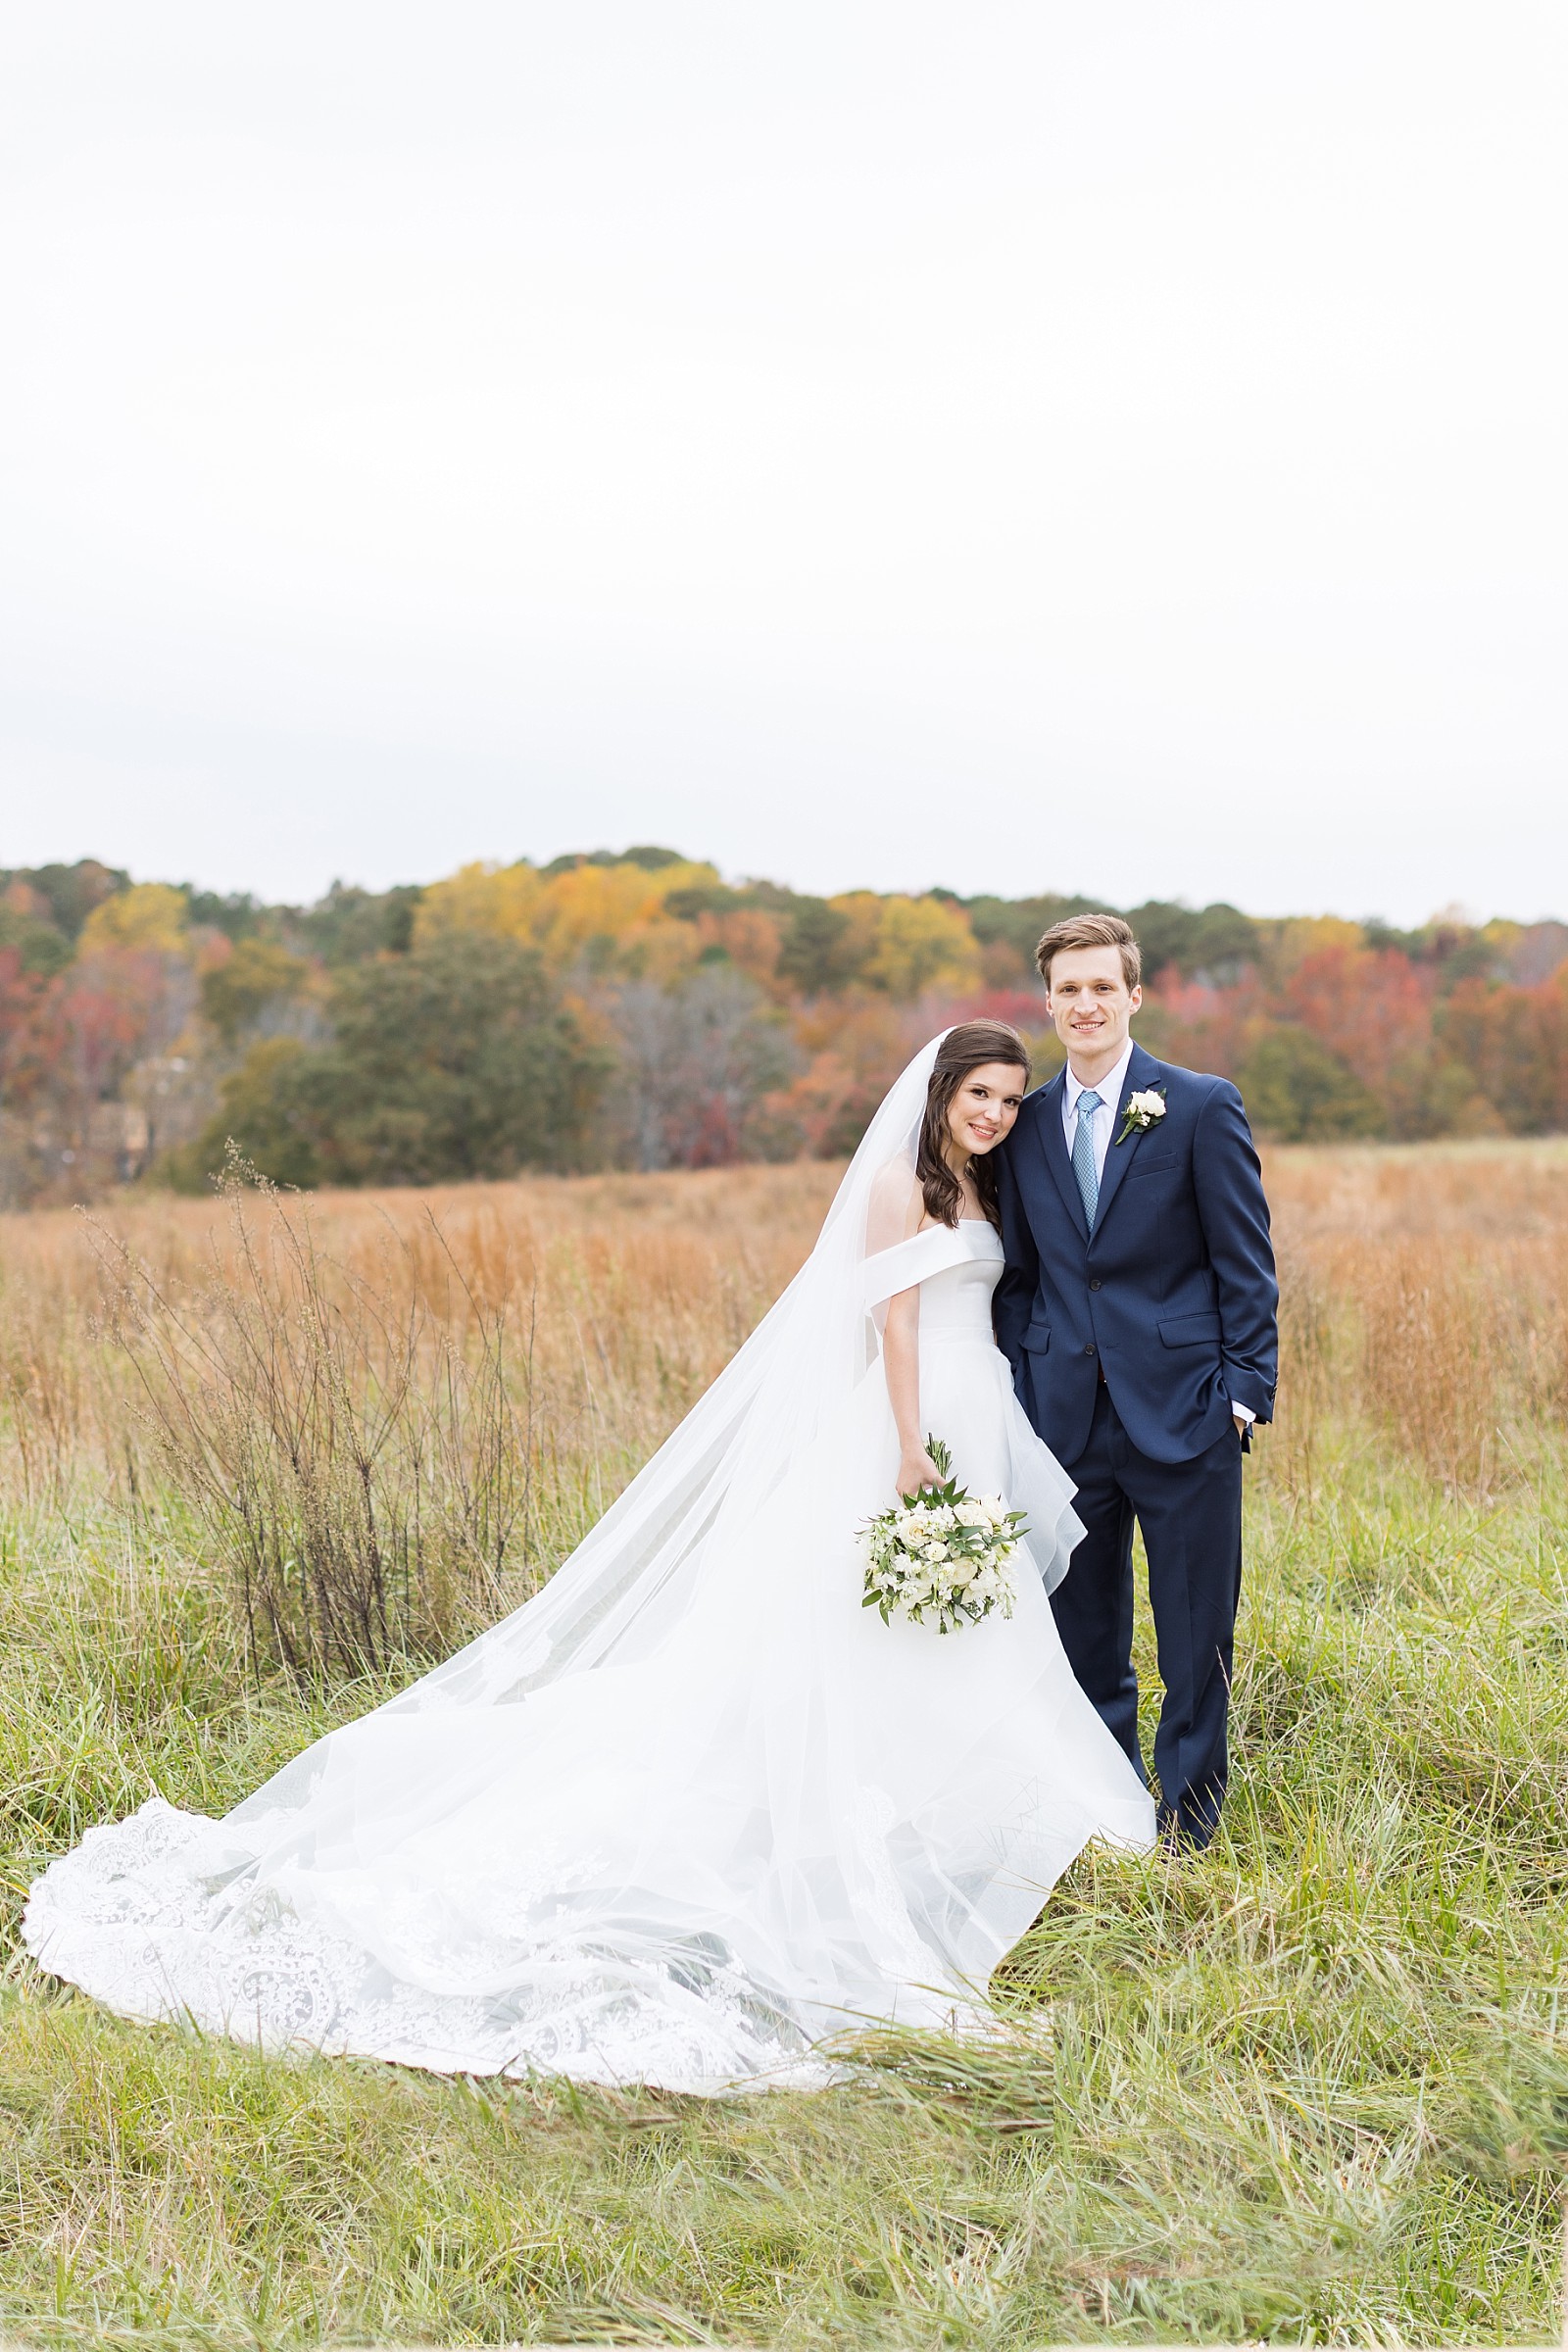 Fall leave backdrops | Fall Wedding at The Meadows in Raleigh | Raleigh NC Wedding Photographer